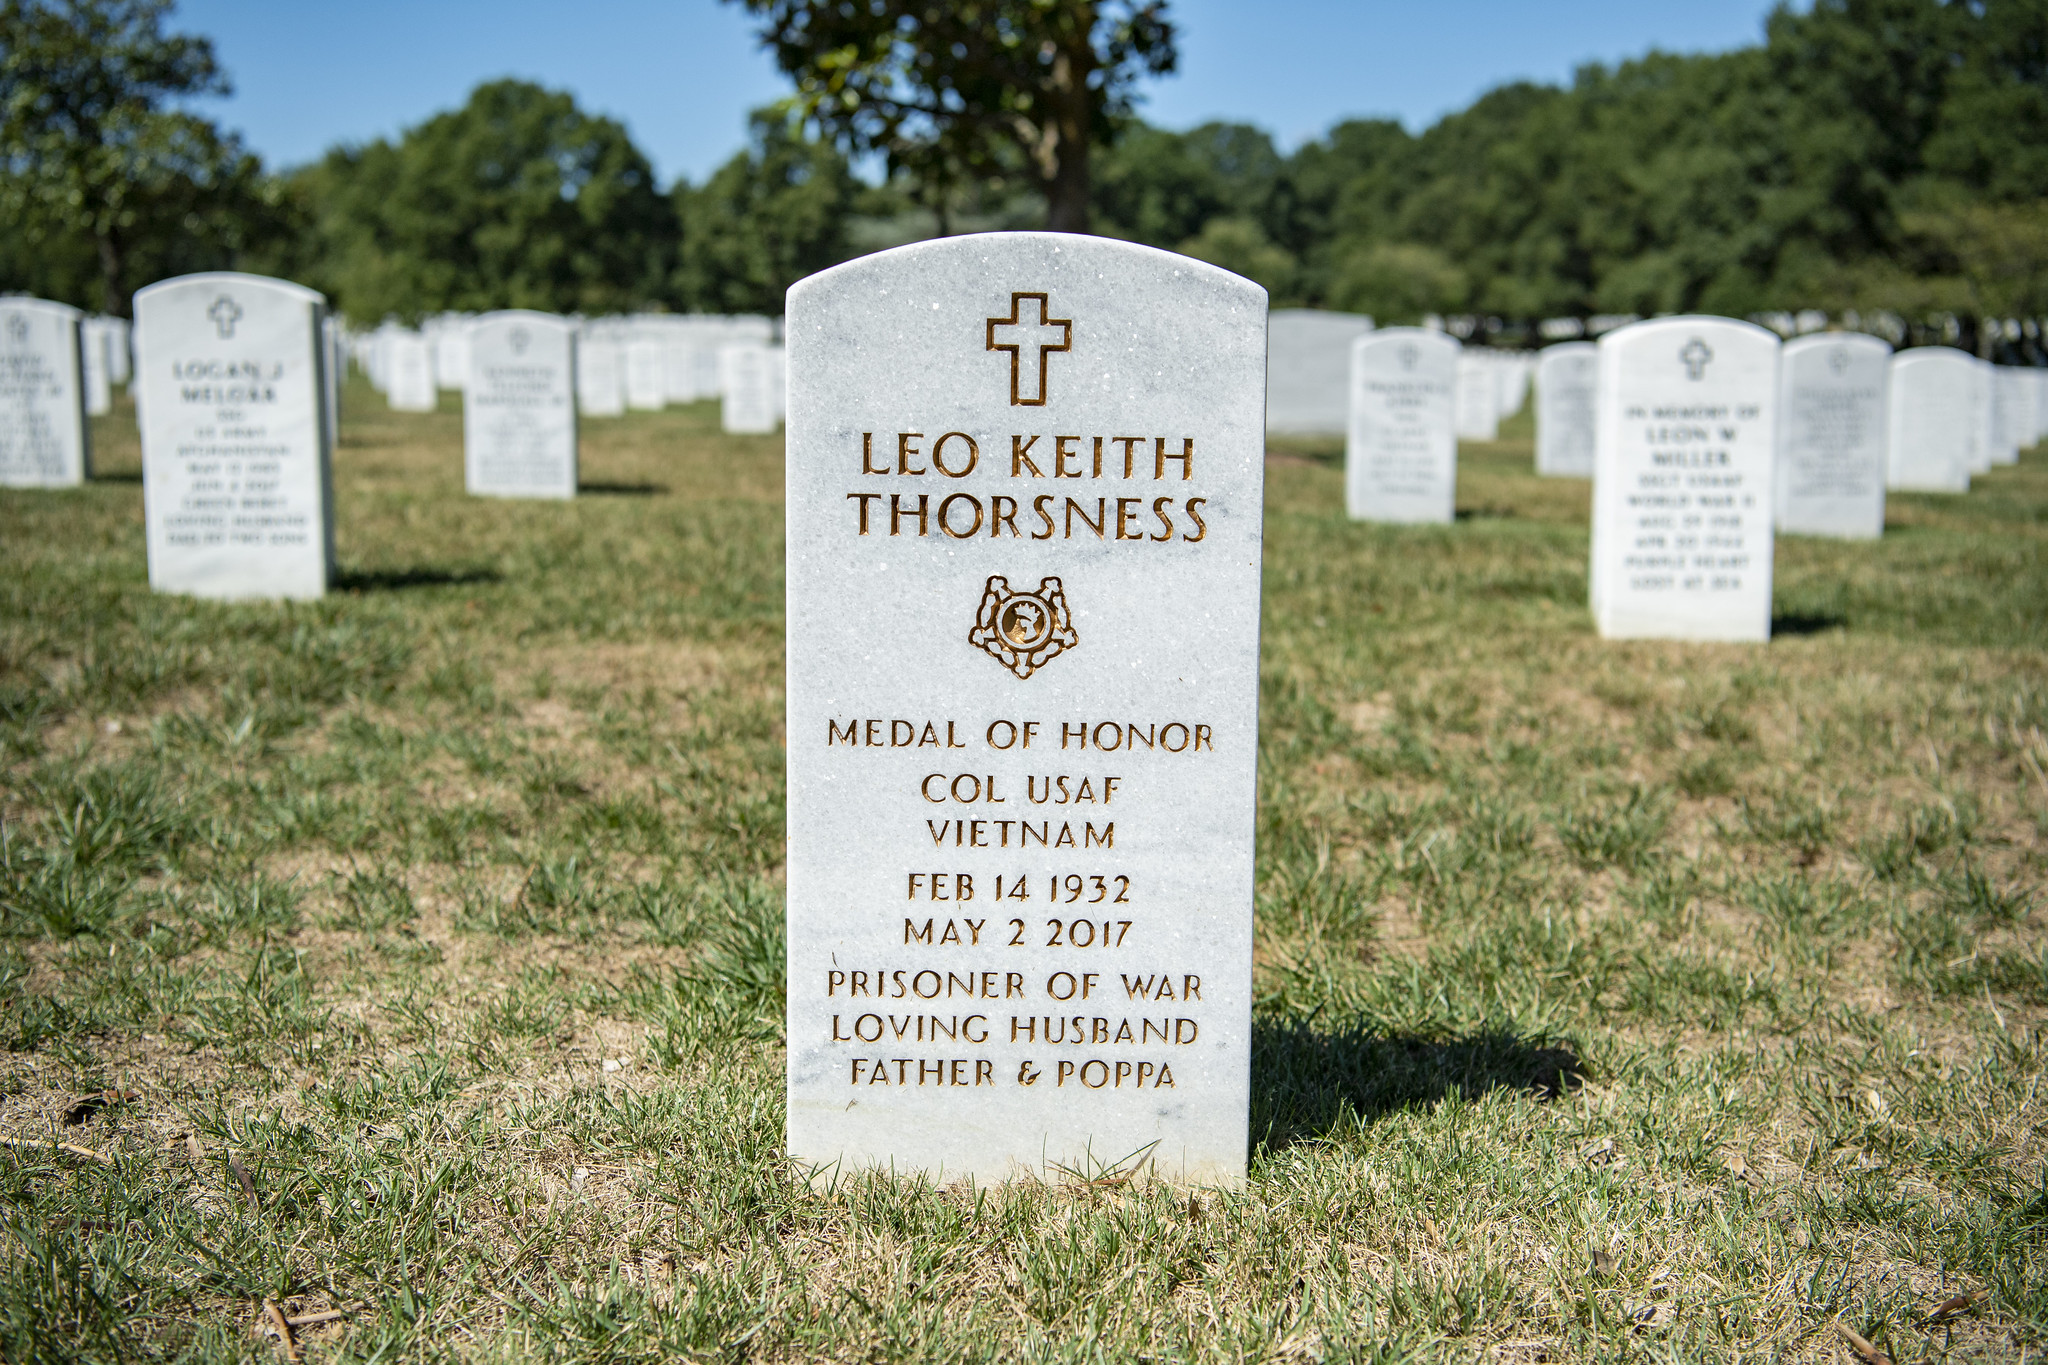 An example of an upright white marble headstone provided by the U.S. government